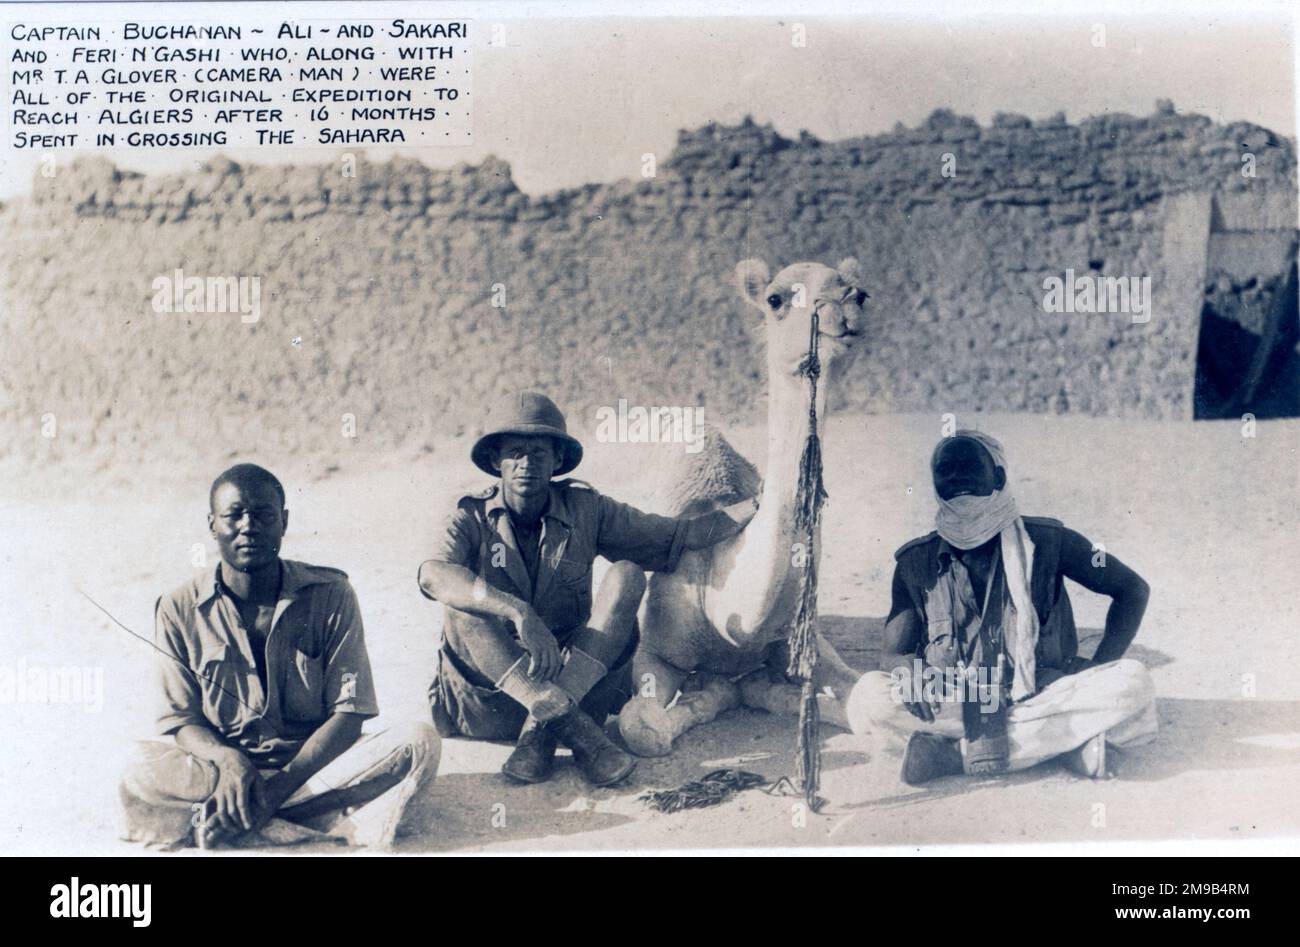 This scene is from a journey across the Sahara taken by Lt D.R.G. Cameron of the Royal Scots. It shows Buchanan, Ali, Sakari the camel and Feri N'Gashi. They were accompanied by T A Glover the cameraman. The picture, taken in Algiers, is of the remnants of the expedition. Stock Photo